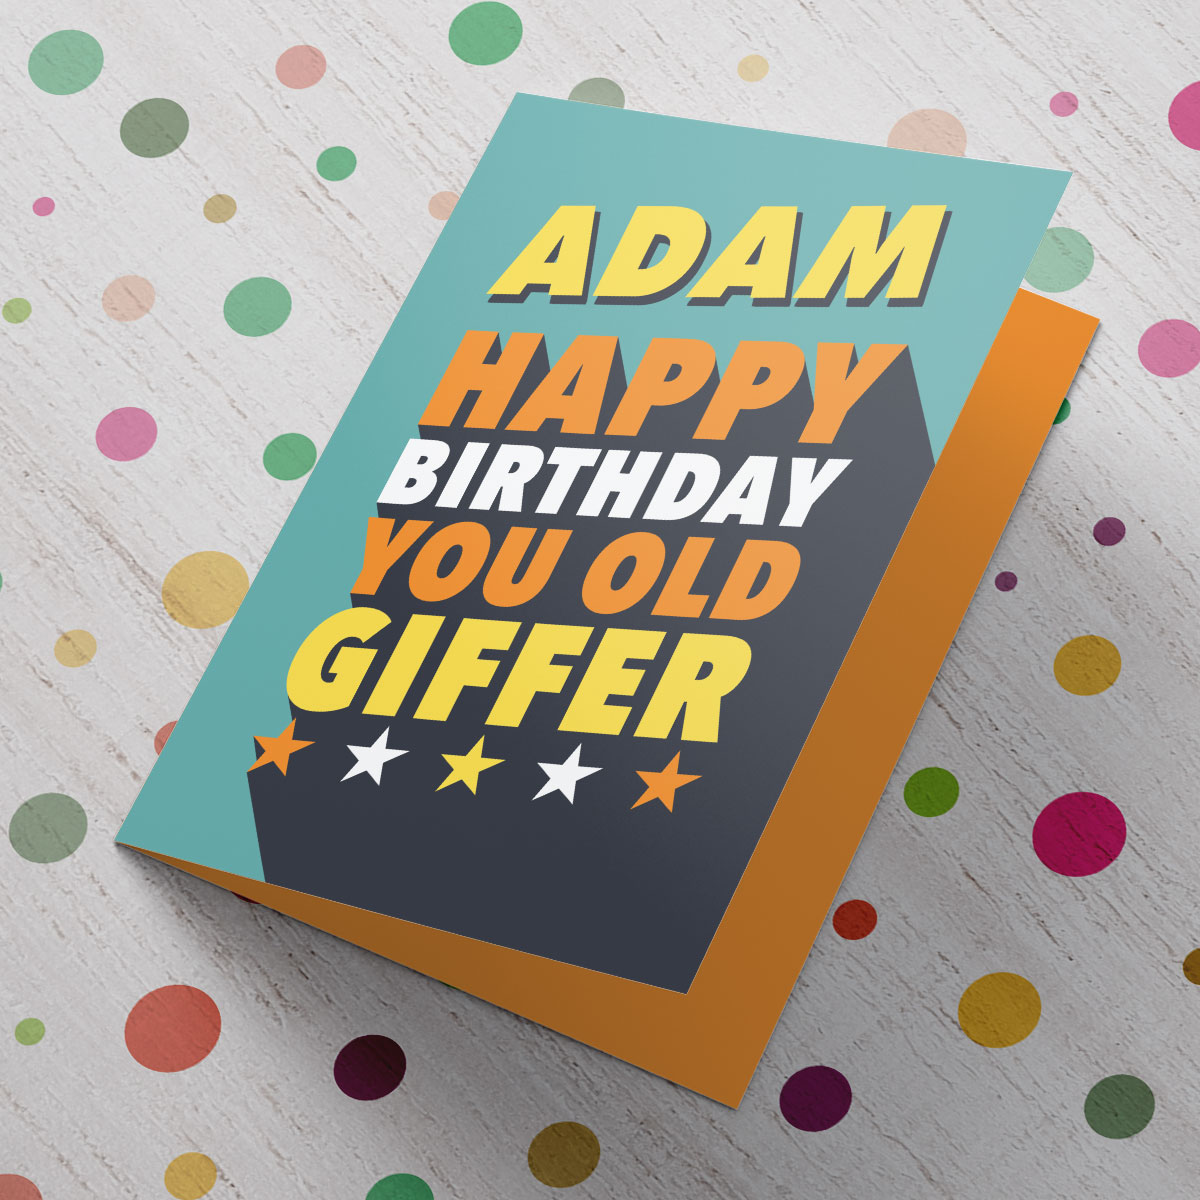 Personalised Birthday Card - You Old Giffer